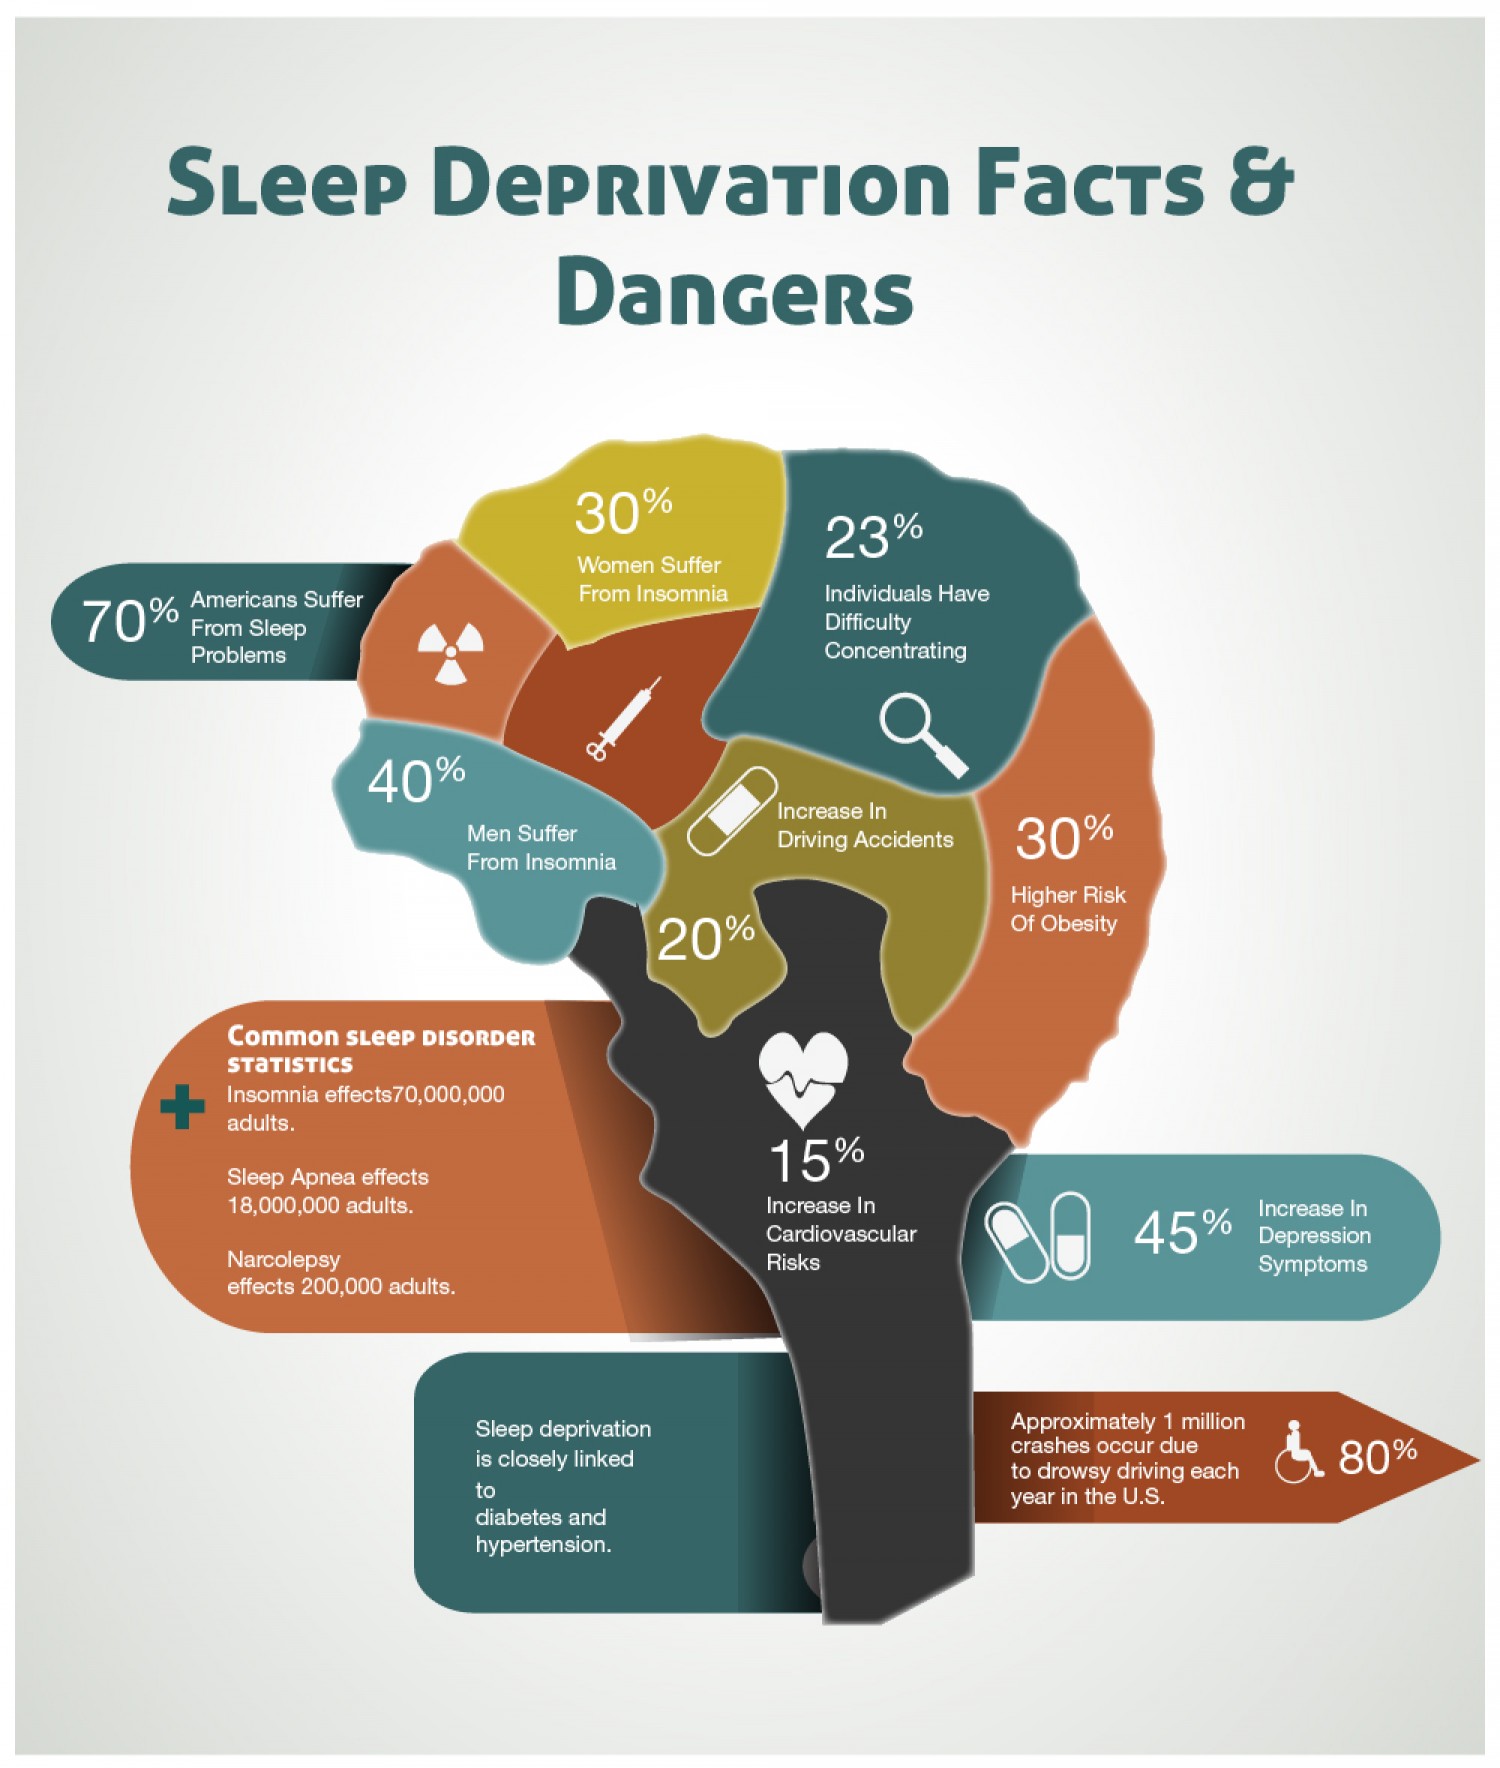 research on sleep demonstrates that